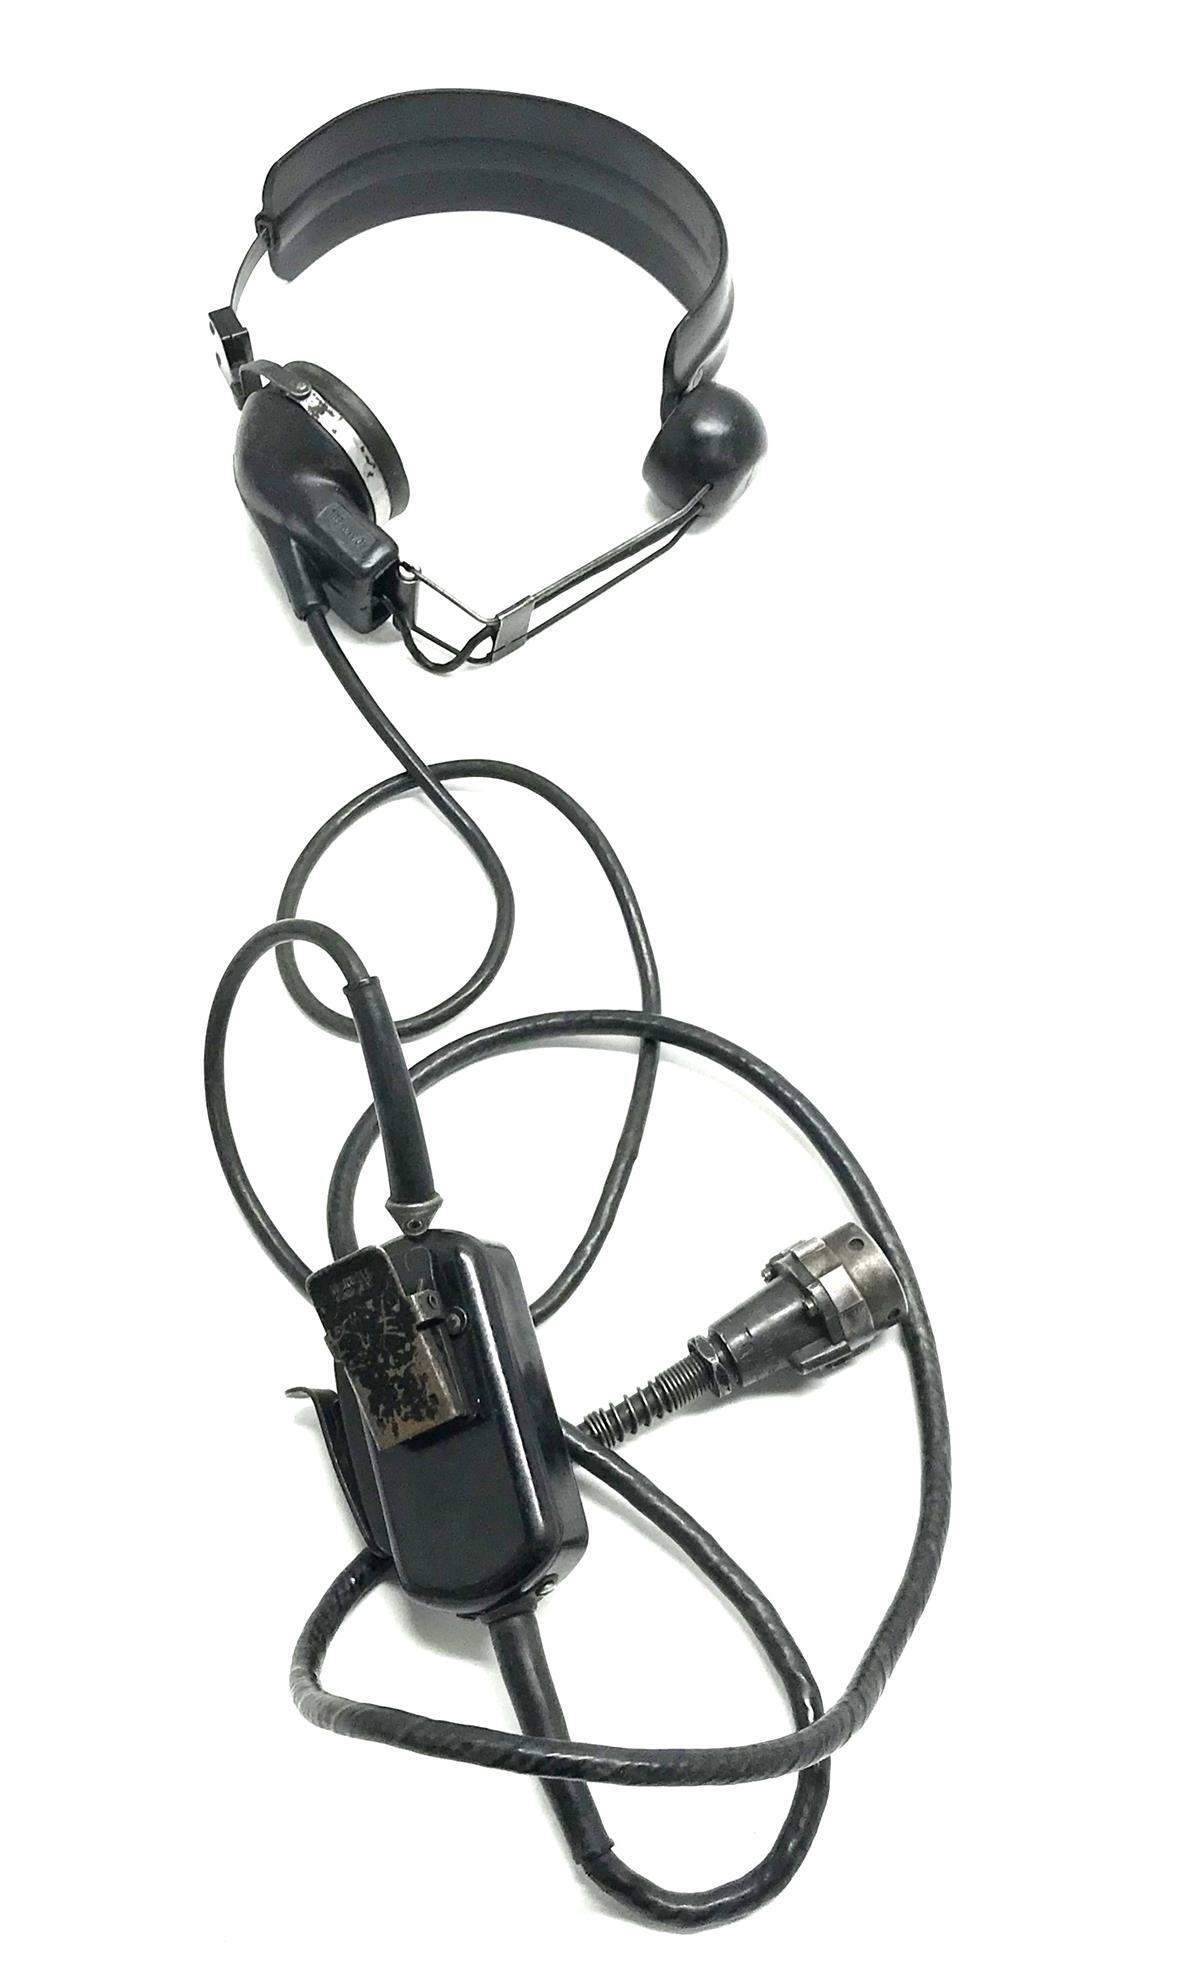 SP-2250 | SP-2250  ANGSA-6C Chest Set Group With Headset Microphone and Handset with U-77U Connector  (9).JPG